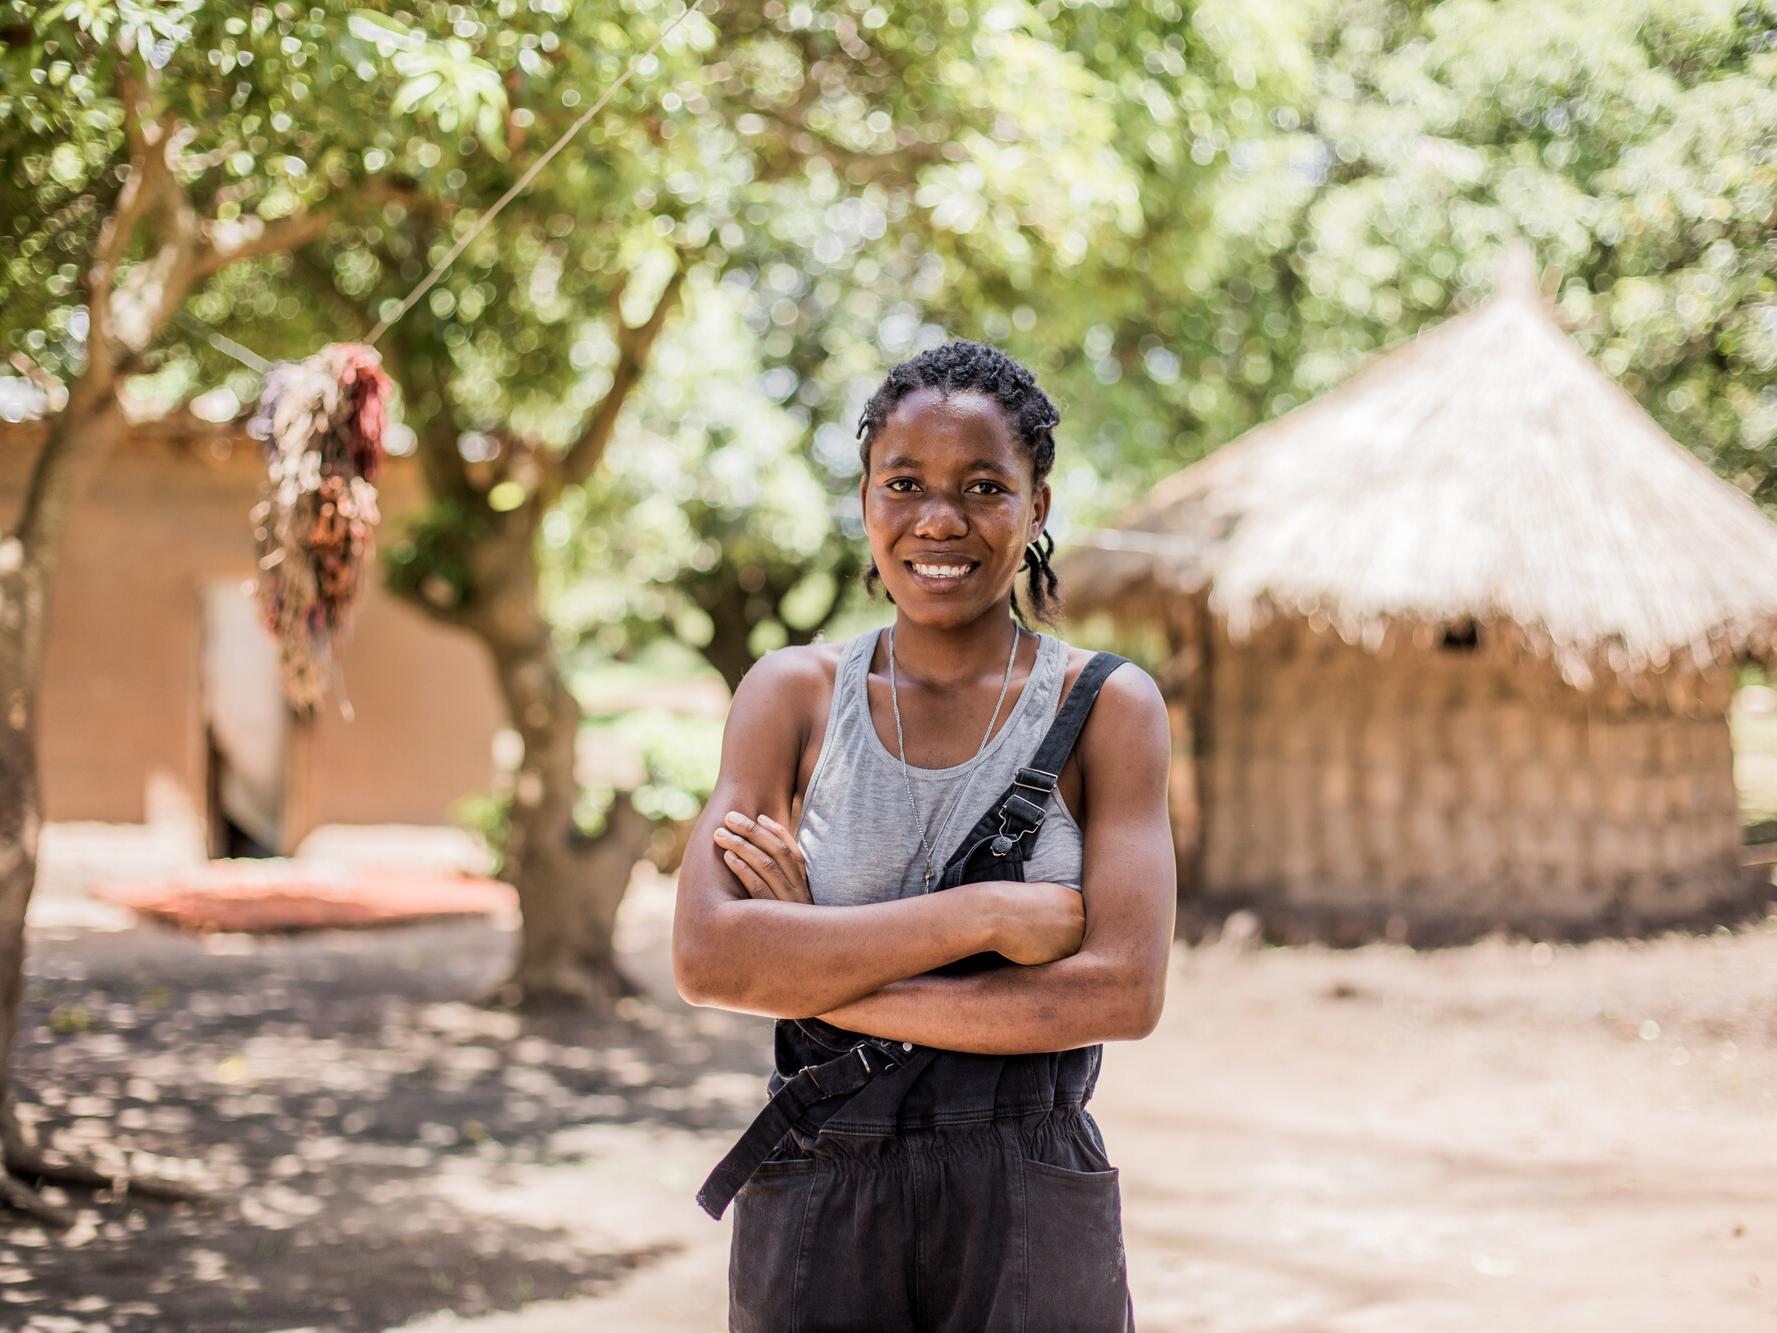 Annette, 19, standing with her arms cross in a village in Zambia